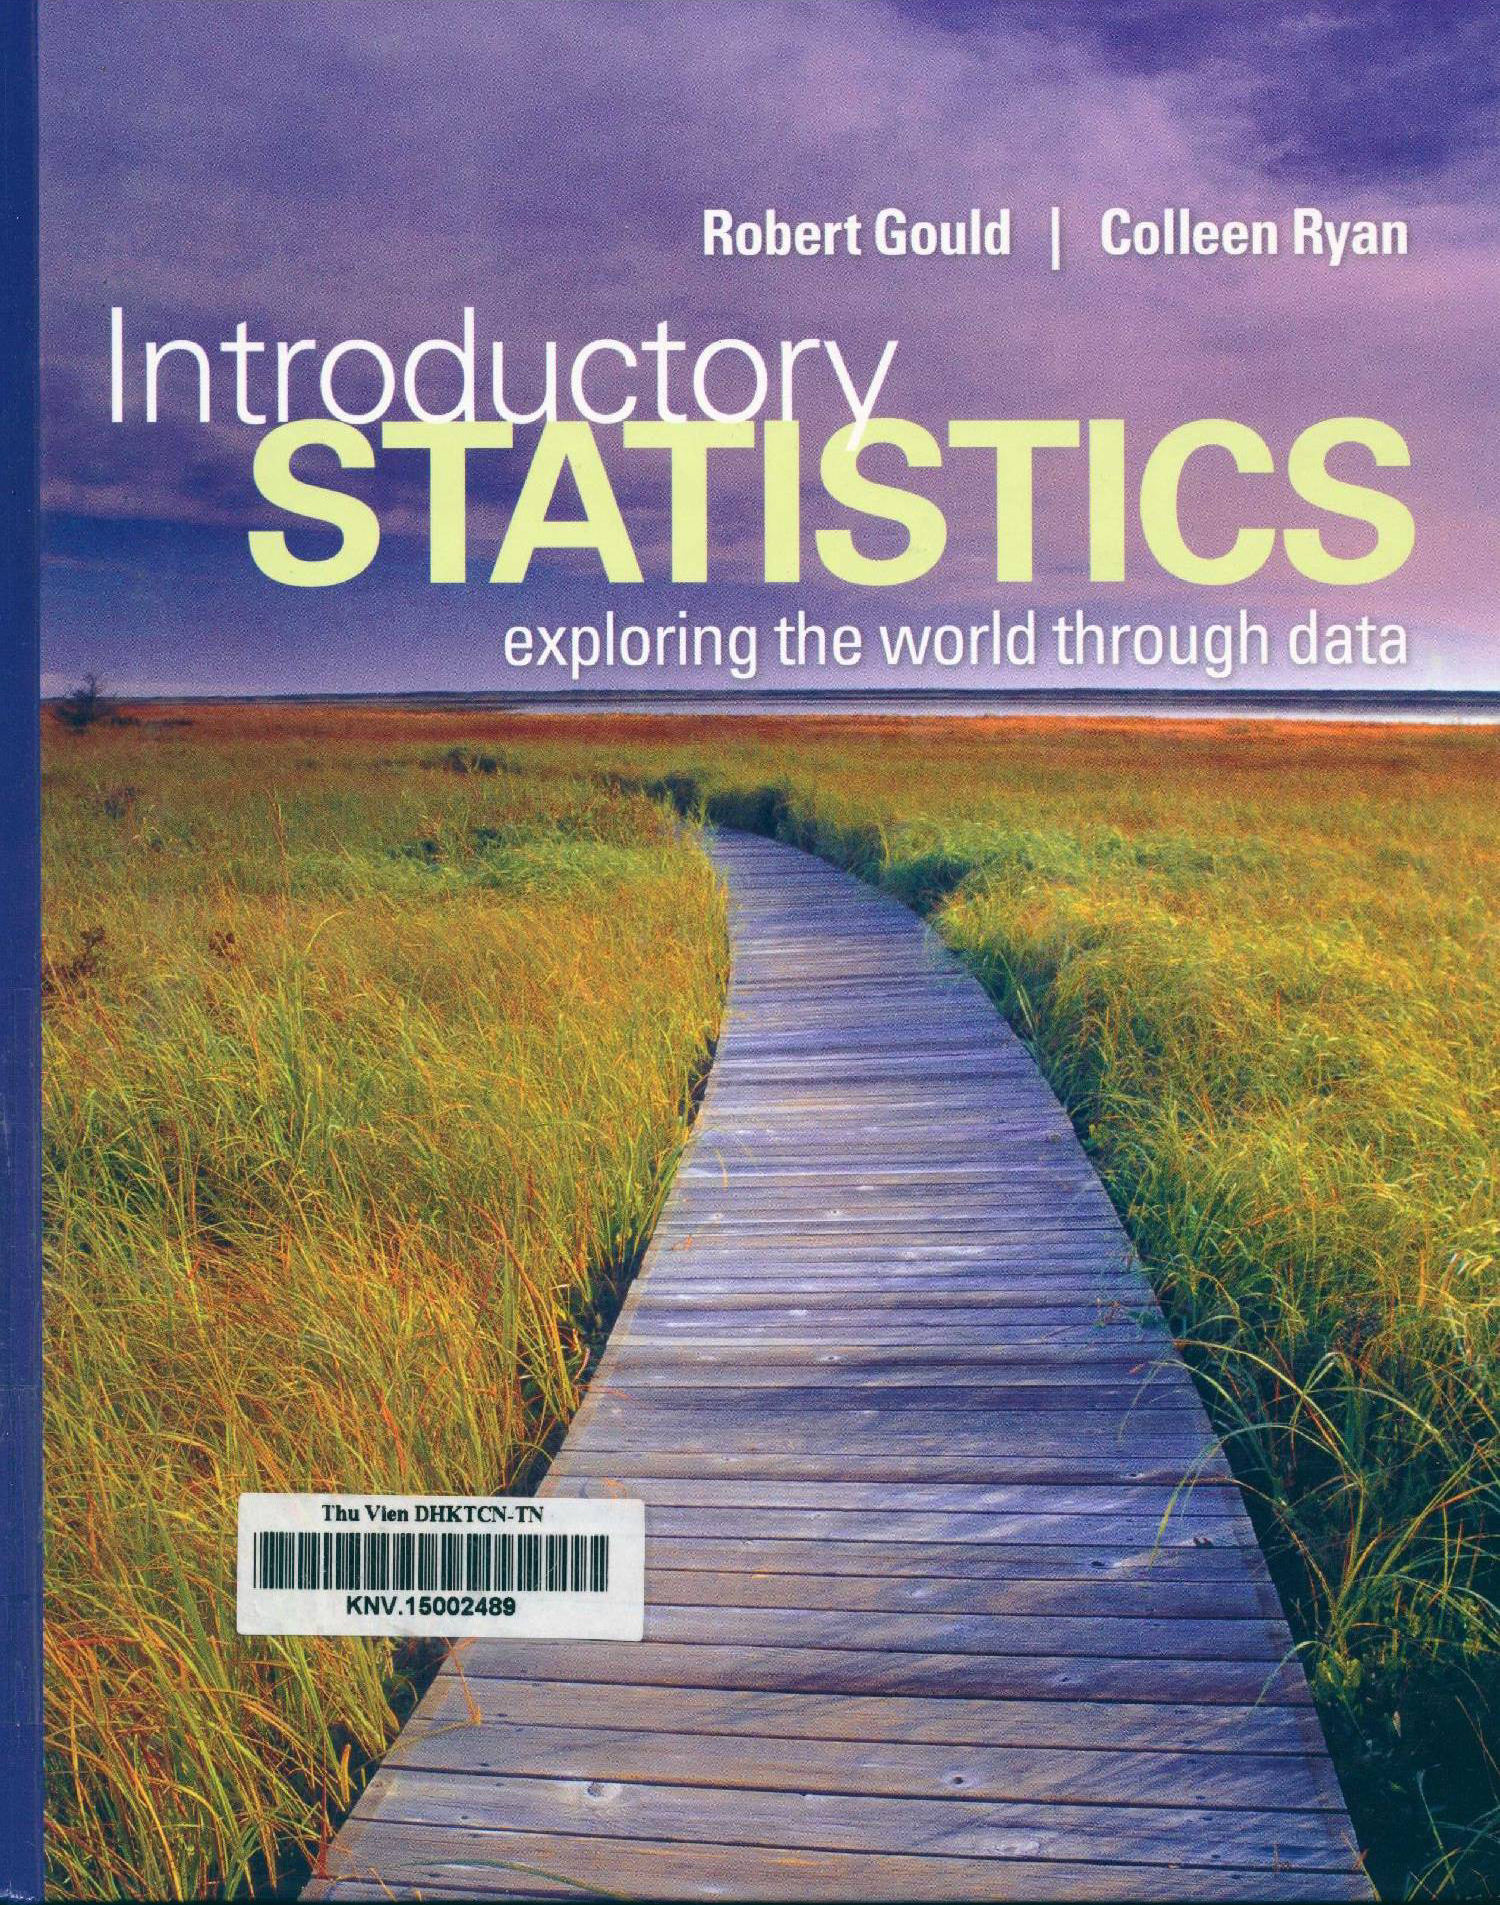 Introductory statistics : exploring the world through data